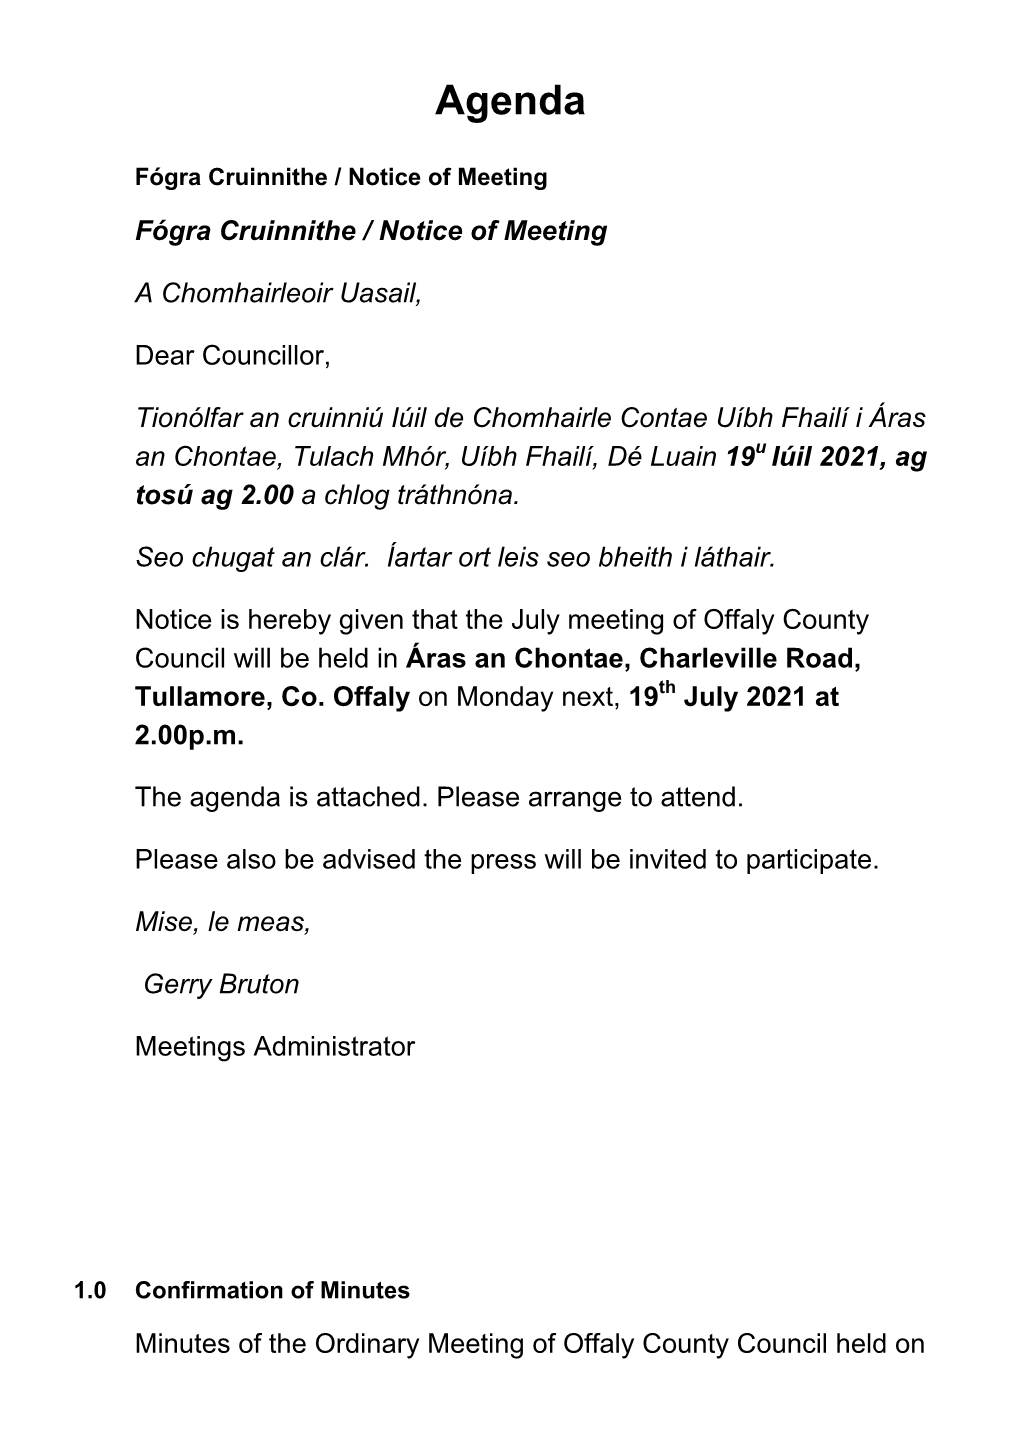 Offaly County Council (19/07/2021)